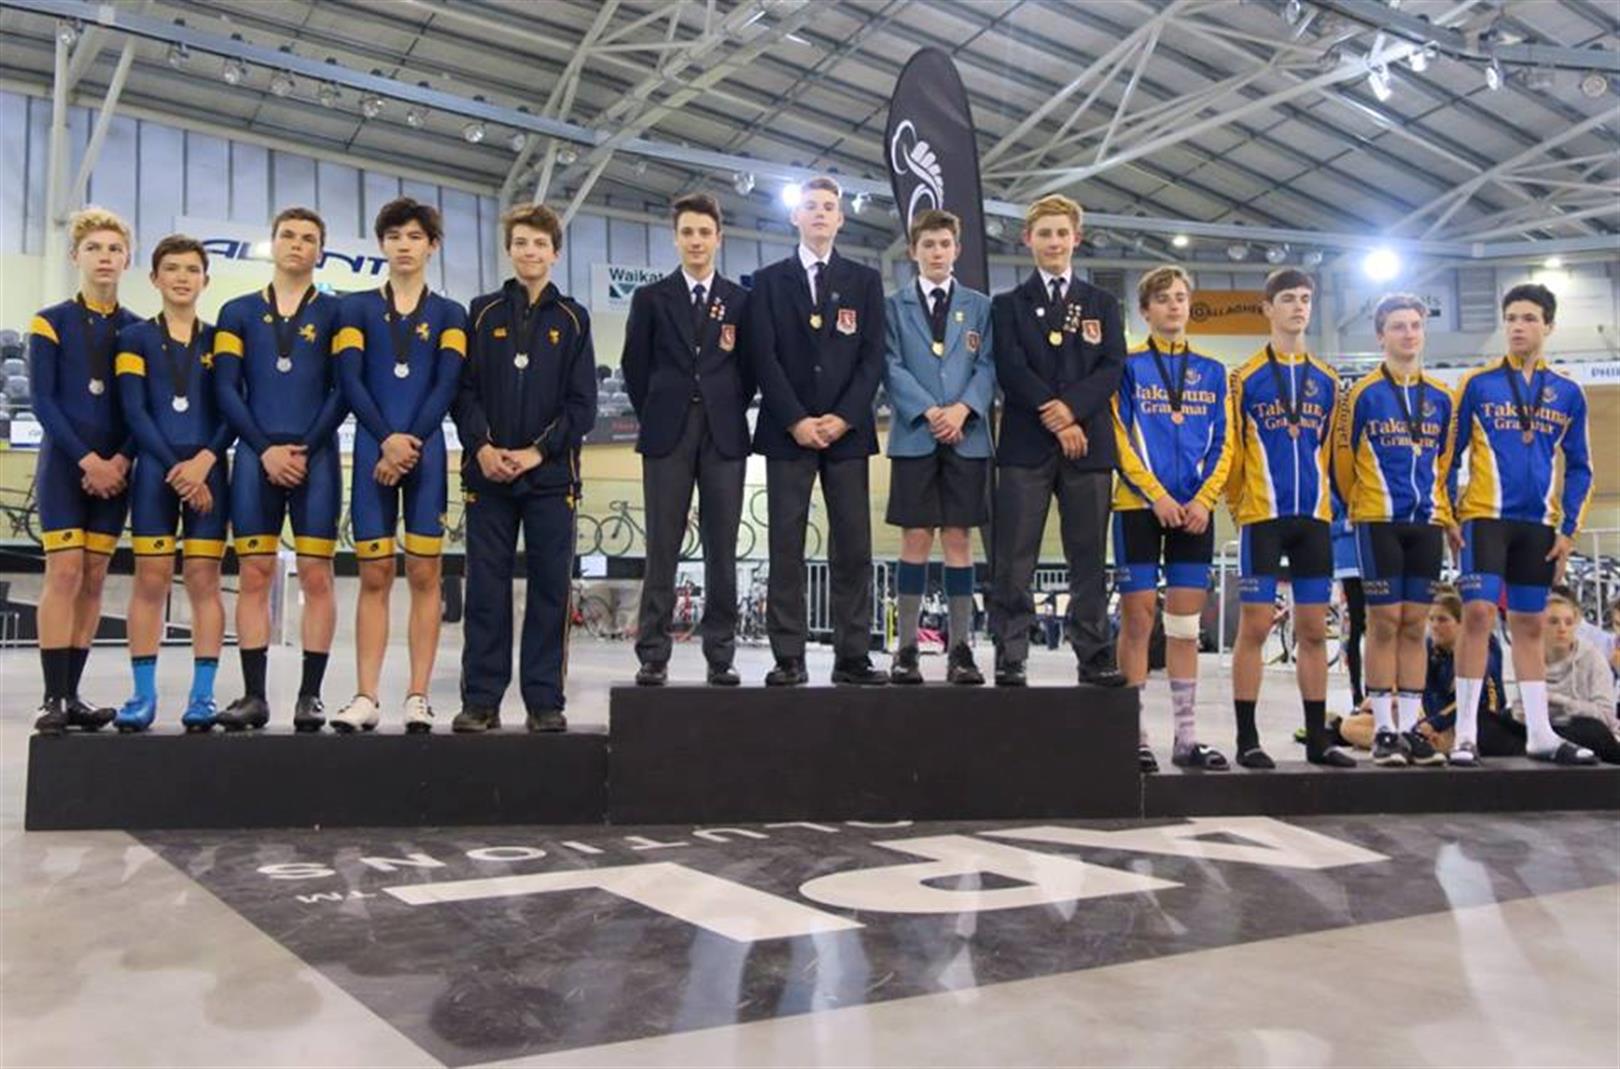 18 Medals for St Peter's Cyclists